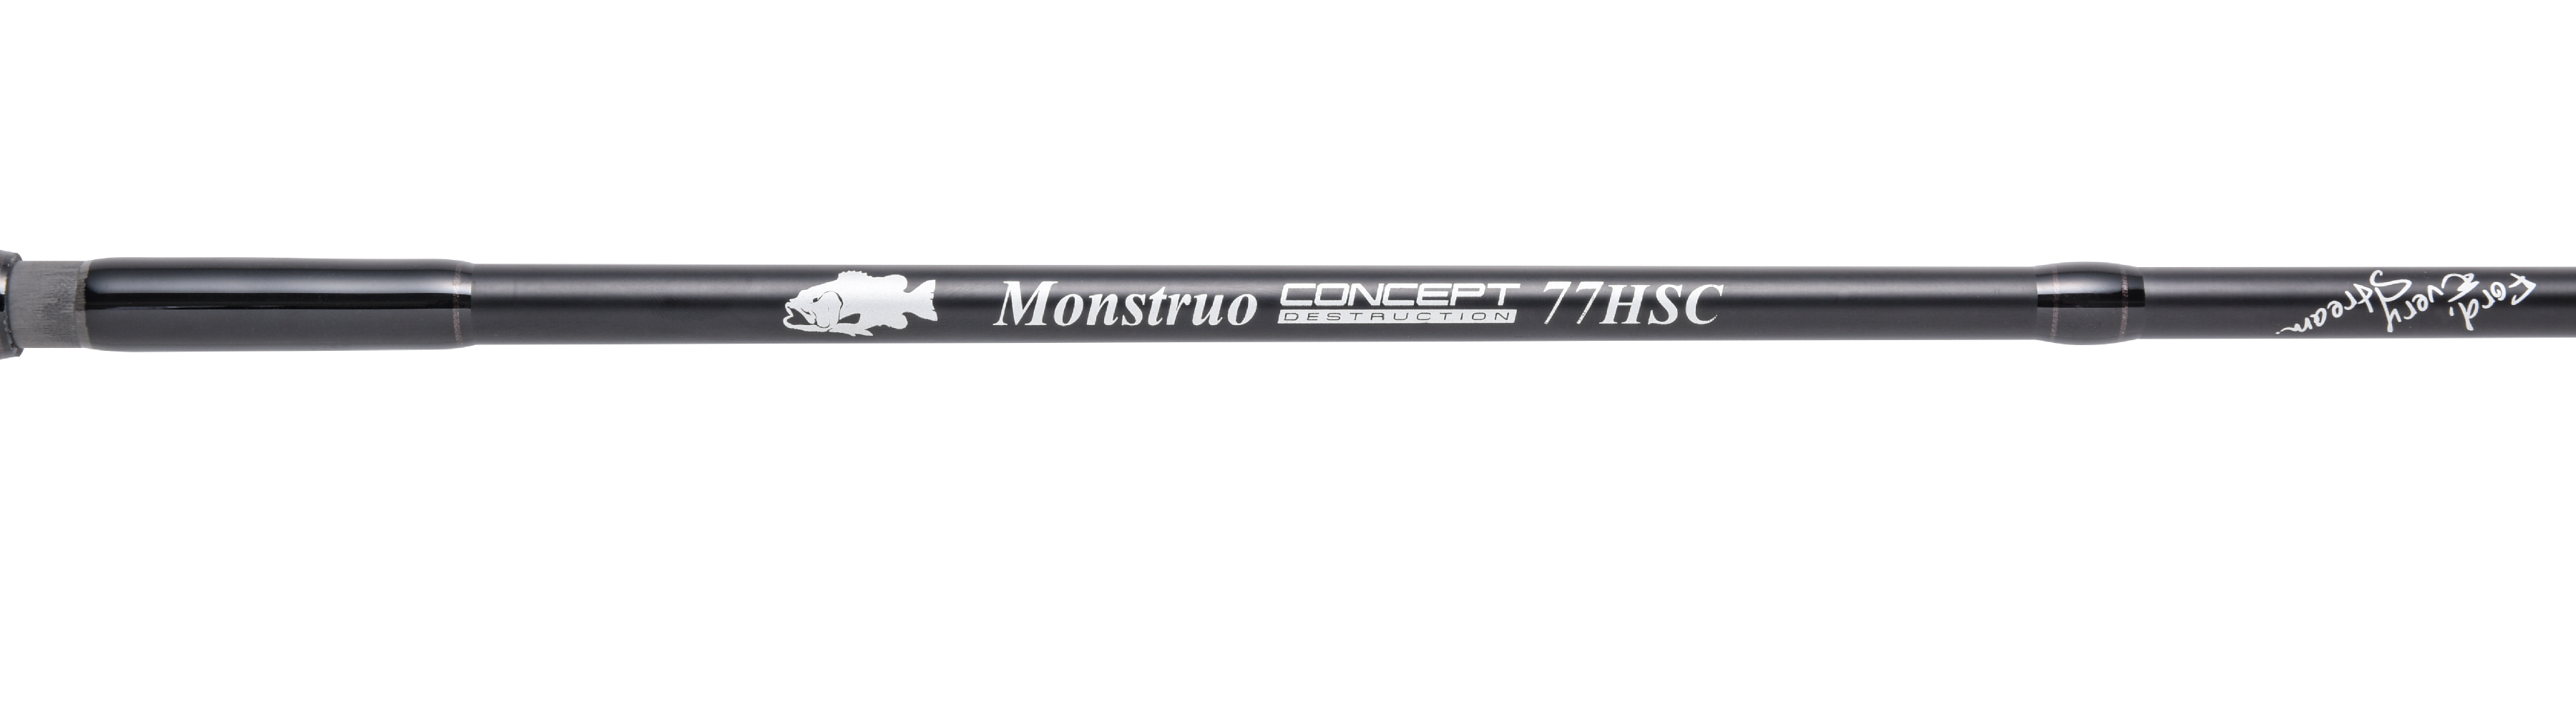 TULALA | Ford every stream | » Monstruo”ConceptDestruction” 77HSC